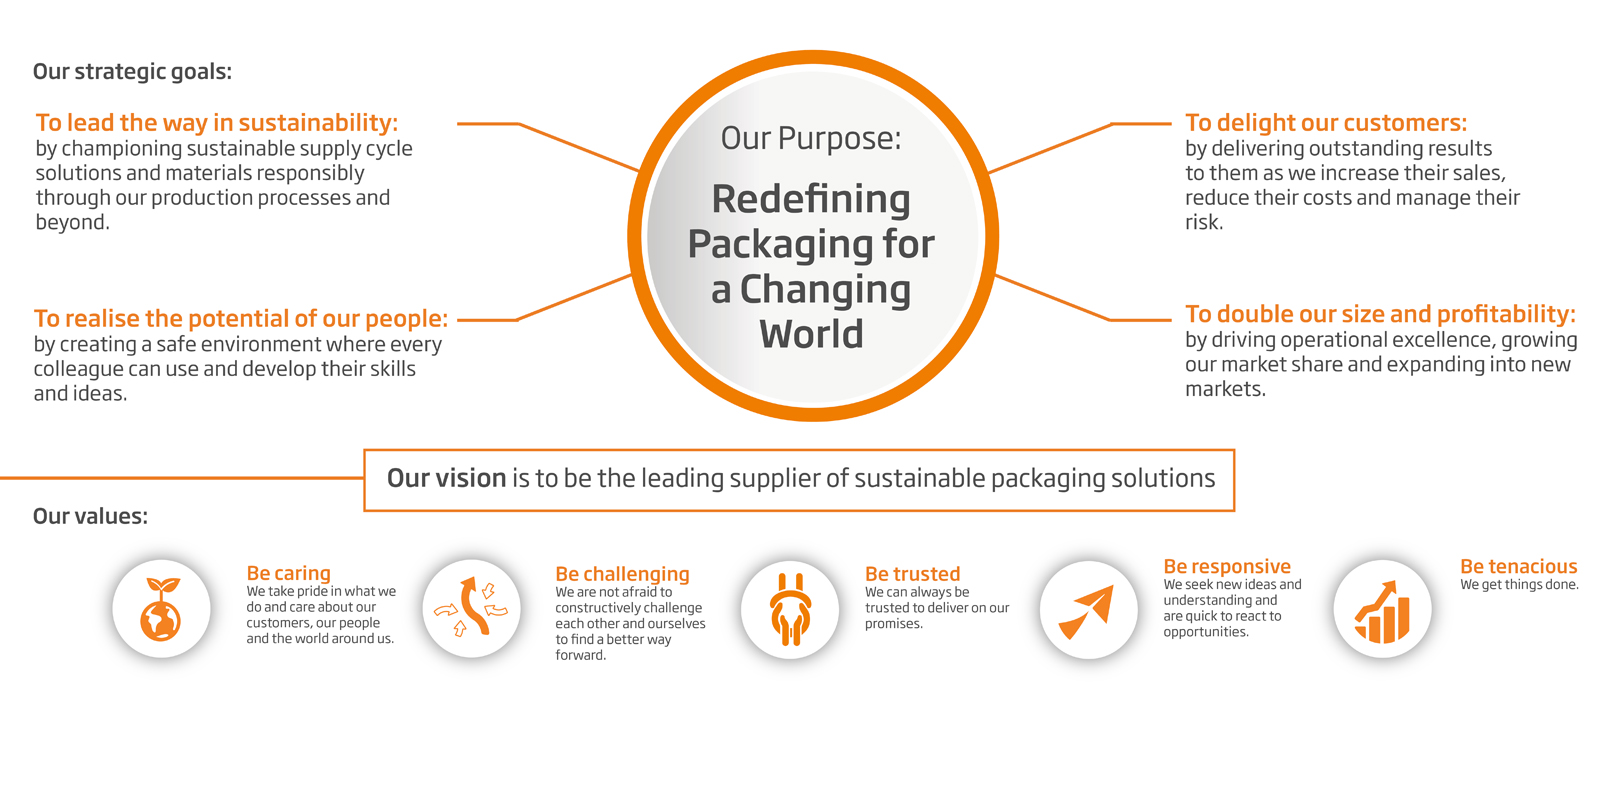 Our Purpose - Redefining Packaging for a Changing World